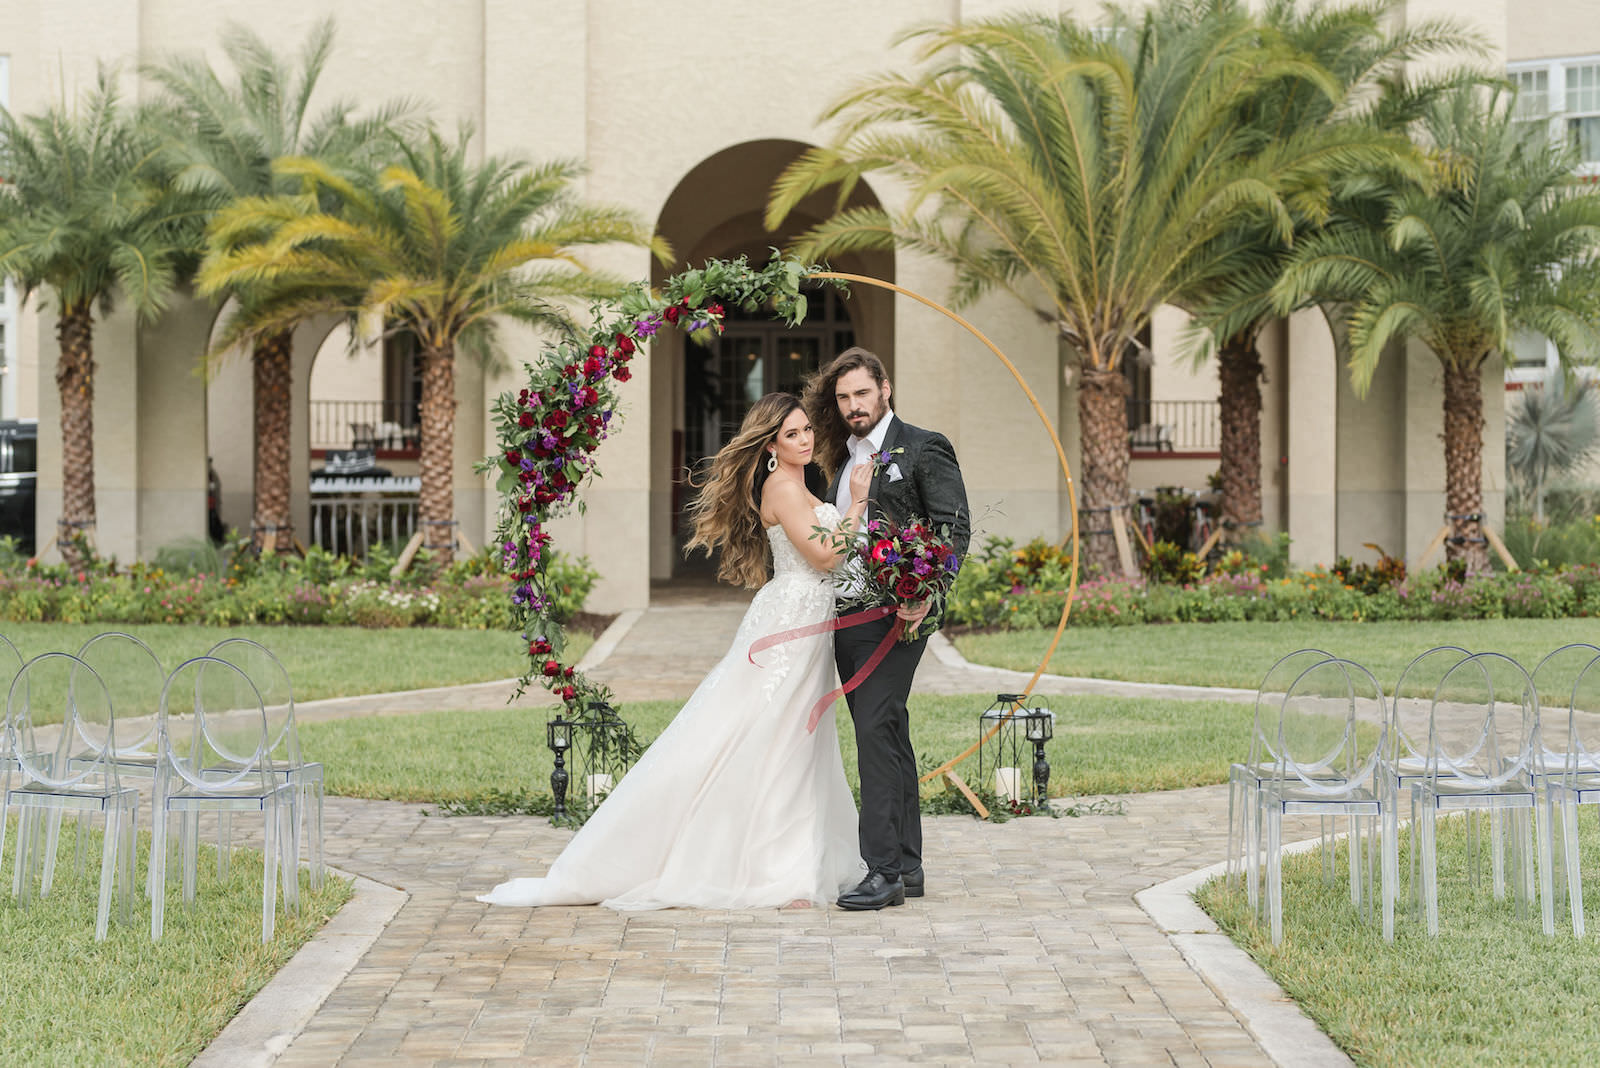 Modern Rock N Roll Wedding, Bride and Groom Standing Outside, Gold Metal Round Arch with Jewel Tone Red and Purple Flowers with Greenery Floral Arrangements, Acrylic Ghost Chairs | Tampa Bay Wedding Photographer Amanda Zabrocki Photography | Wedding Rentals Kate Ryan Event Rentals | Dunedin Wedding Venue The Fenway